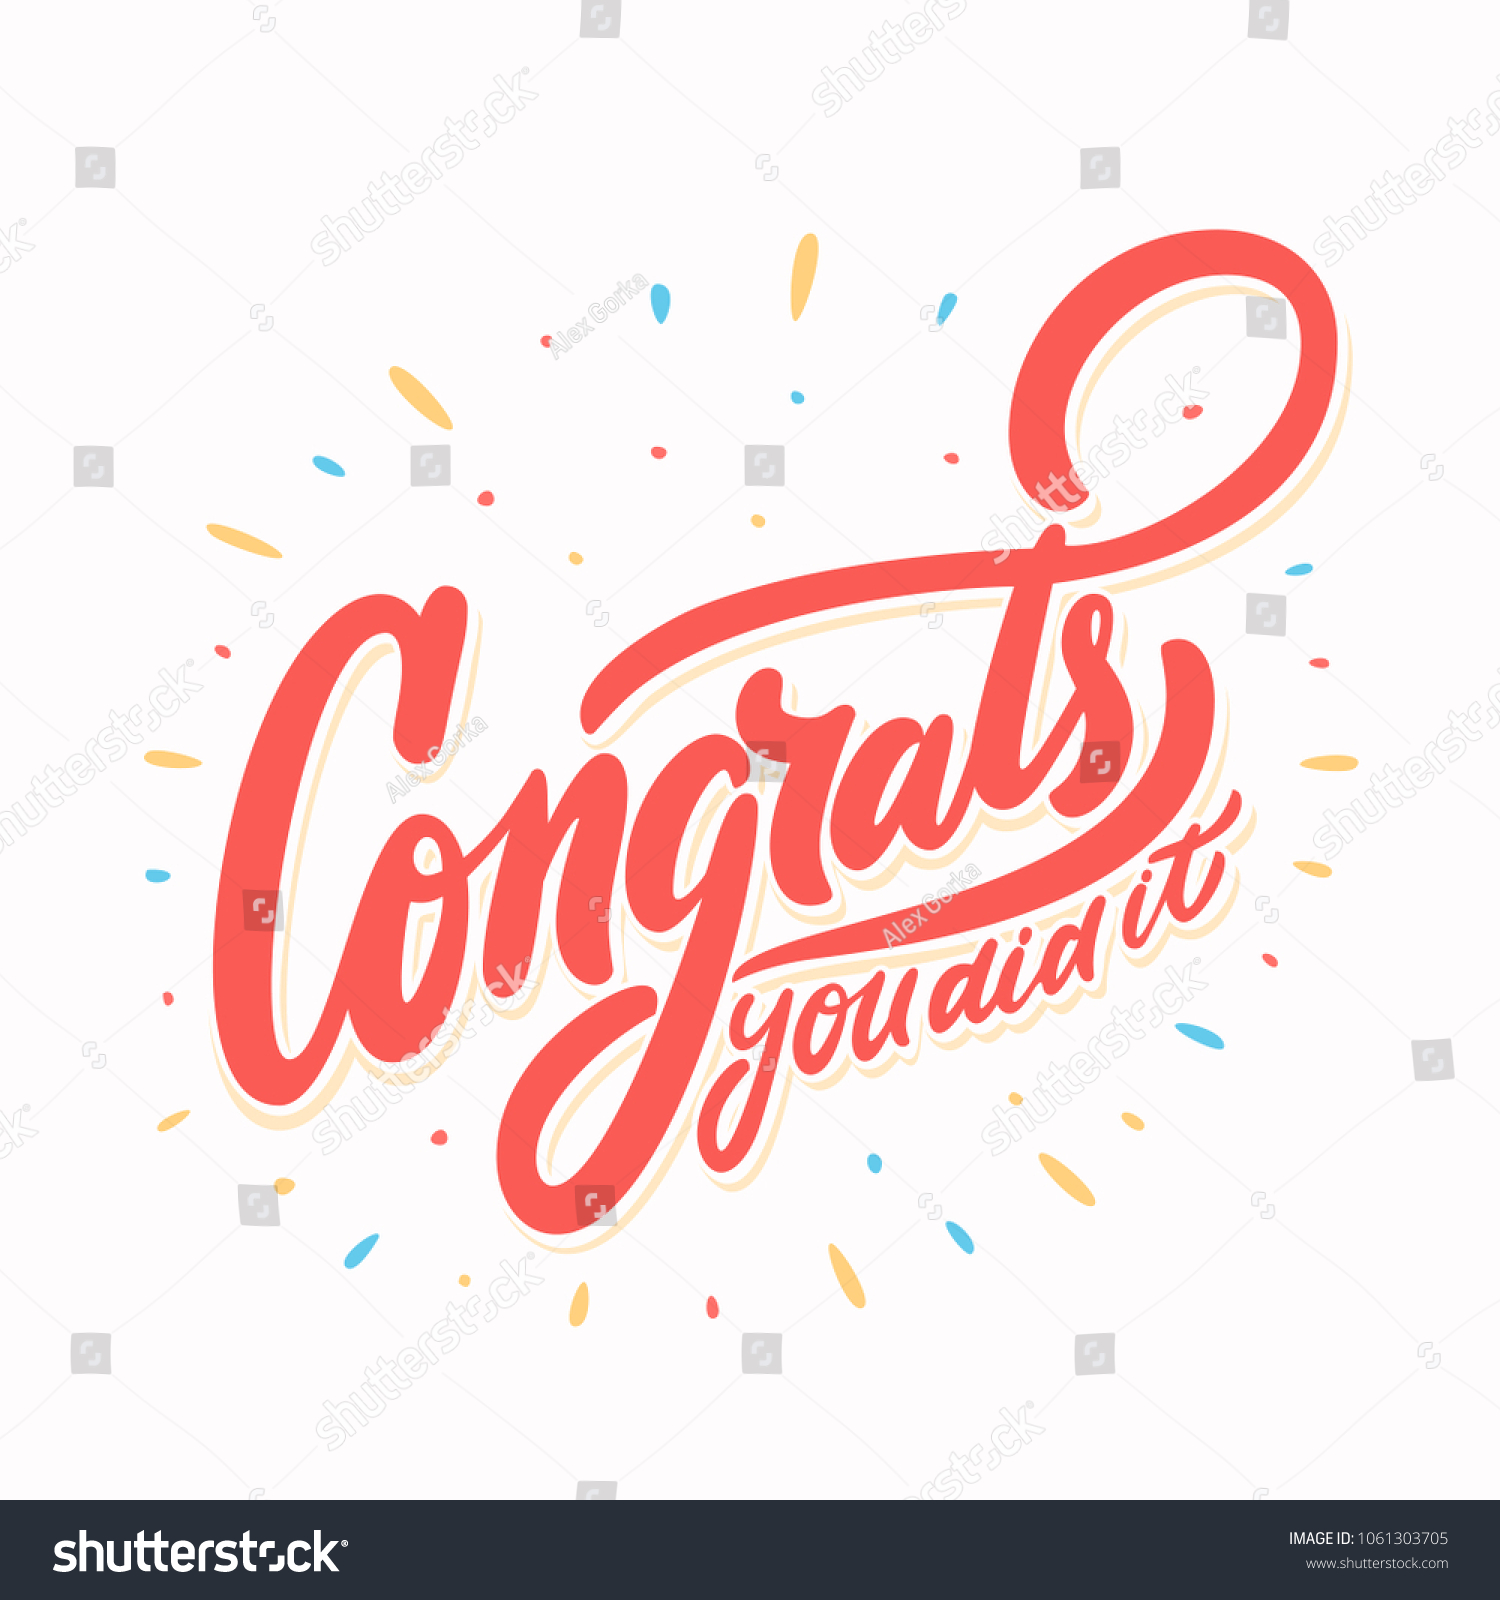 Congrats You Did Greeting Banner Stock Vector (Royalty Free) 1061303705